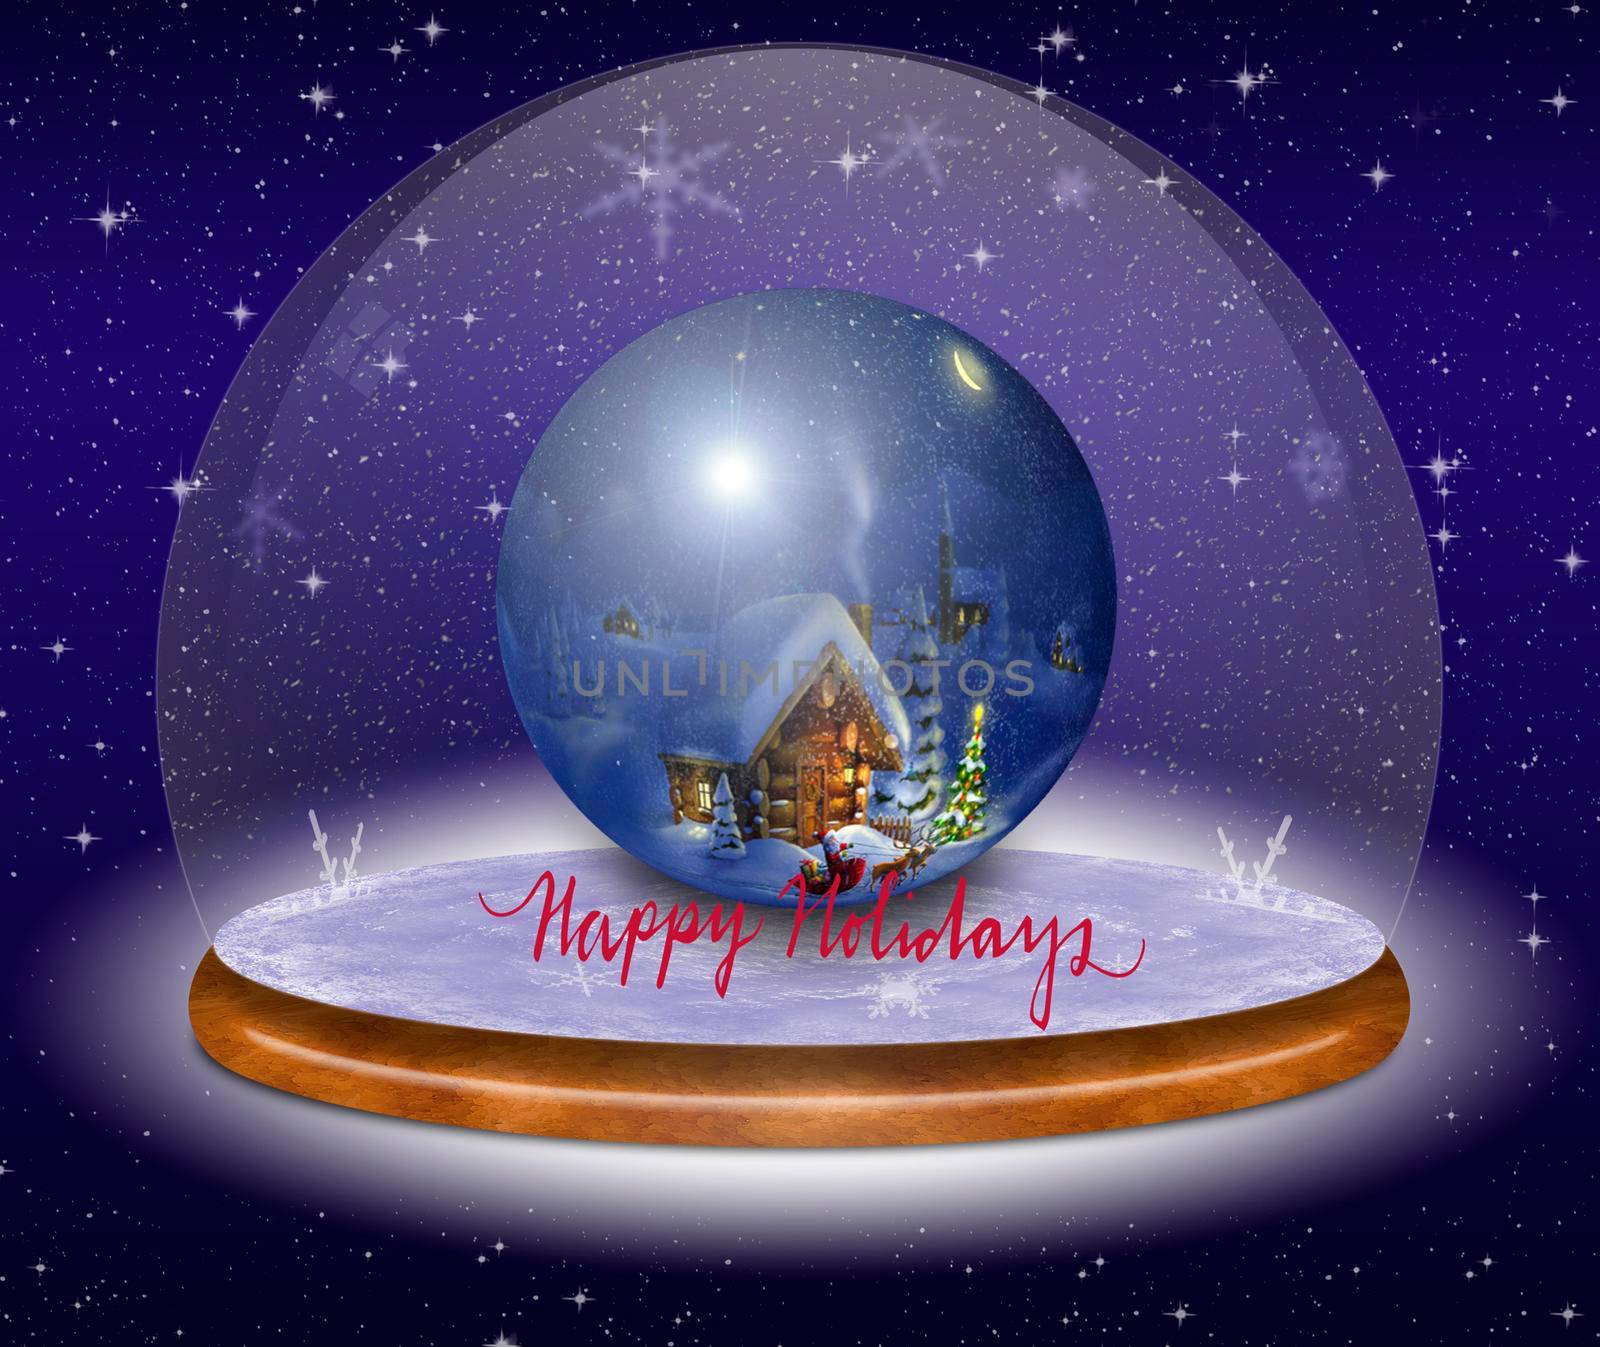 Christmas card : on a frosty background with snowflakes beautiful ball with Christmas symbols.